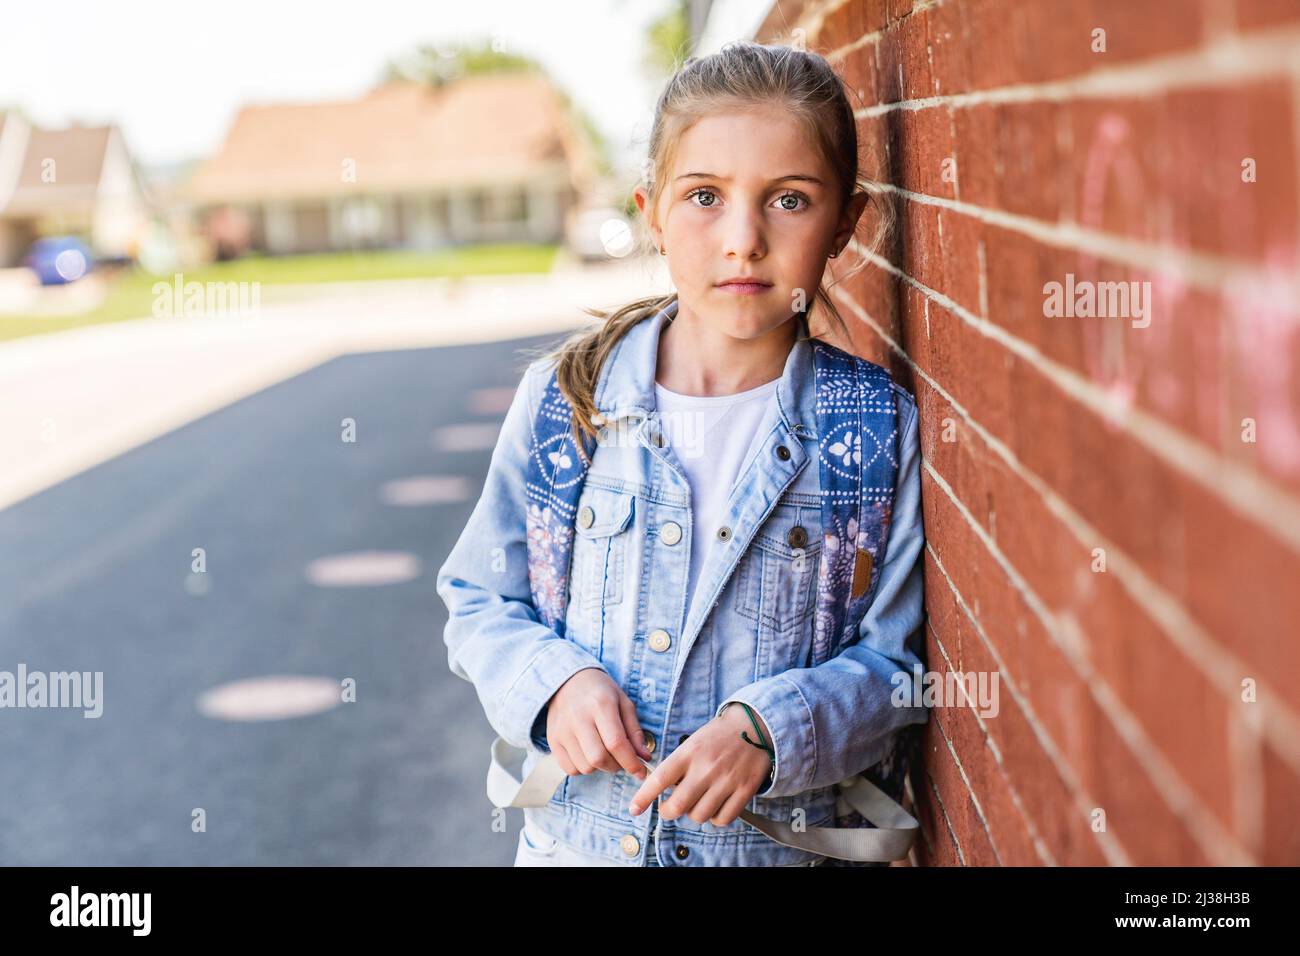 Young children girl on the school playground with backpack Stock Photo